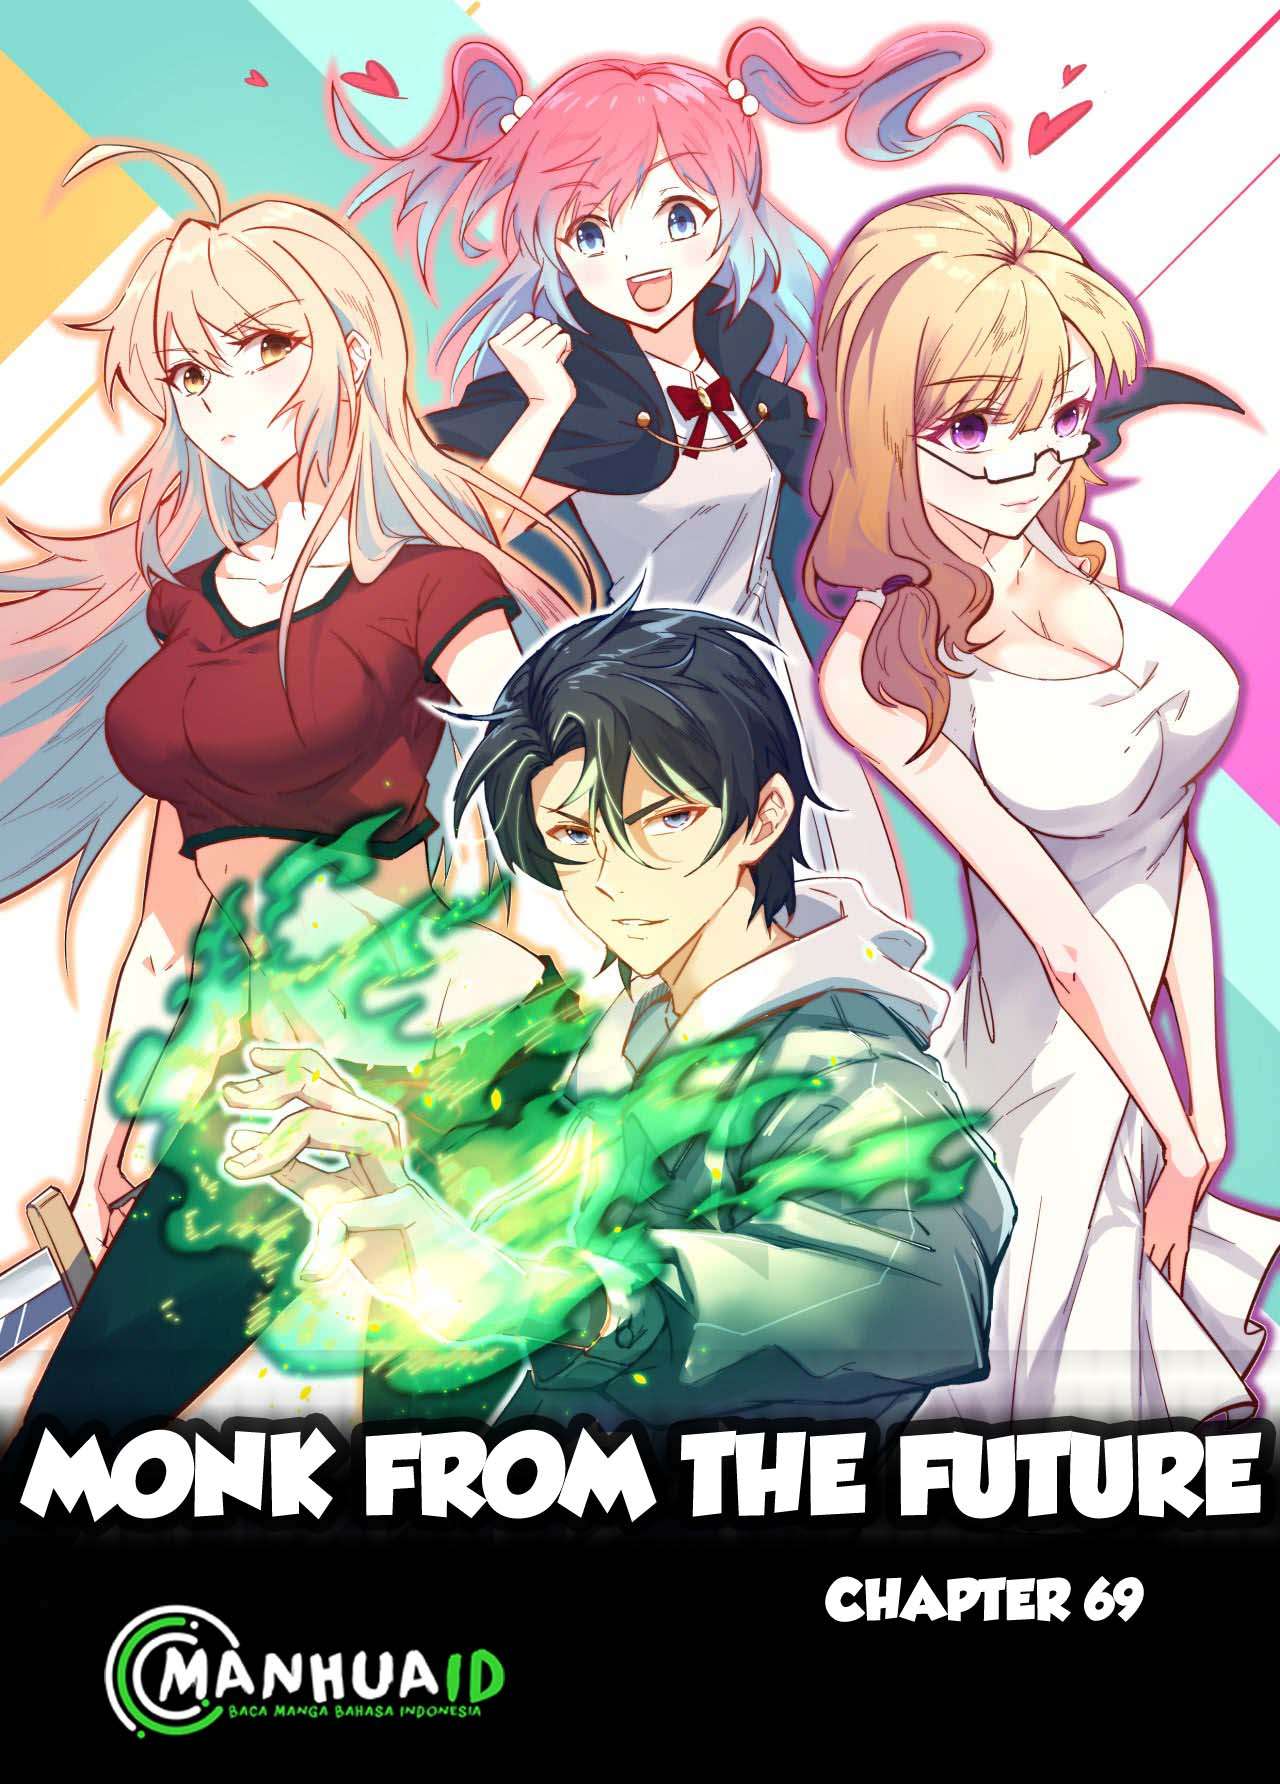 Monk From the Future Chapter 69